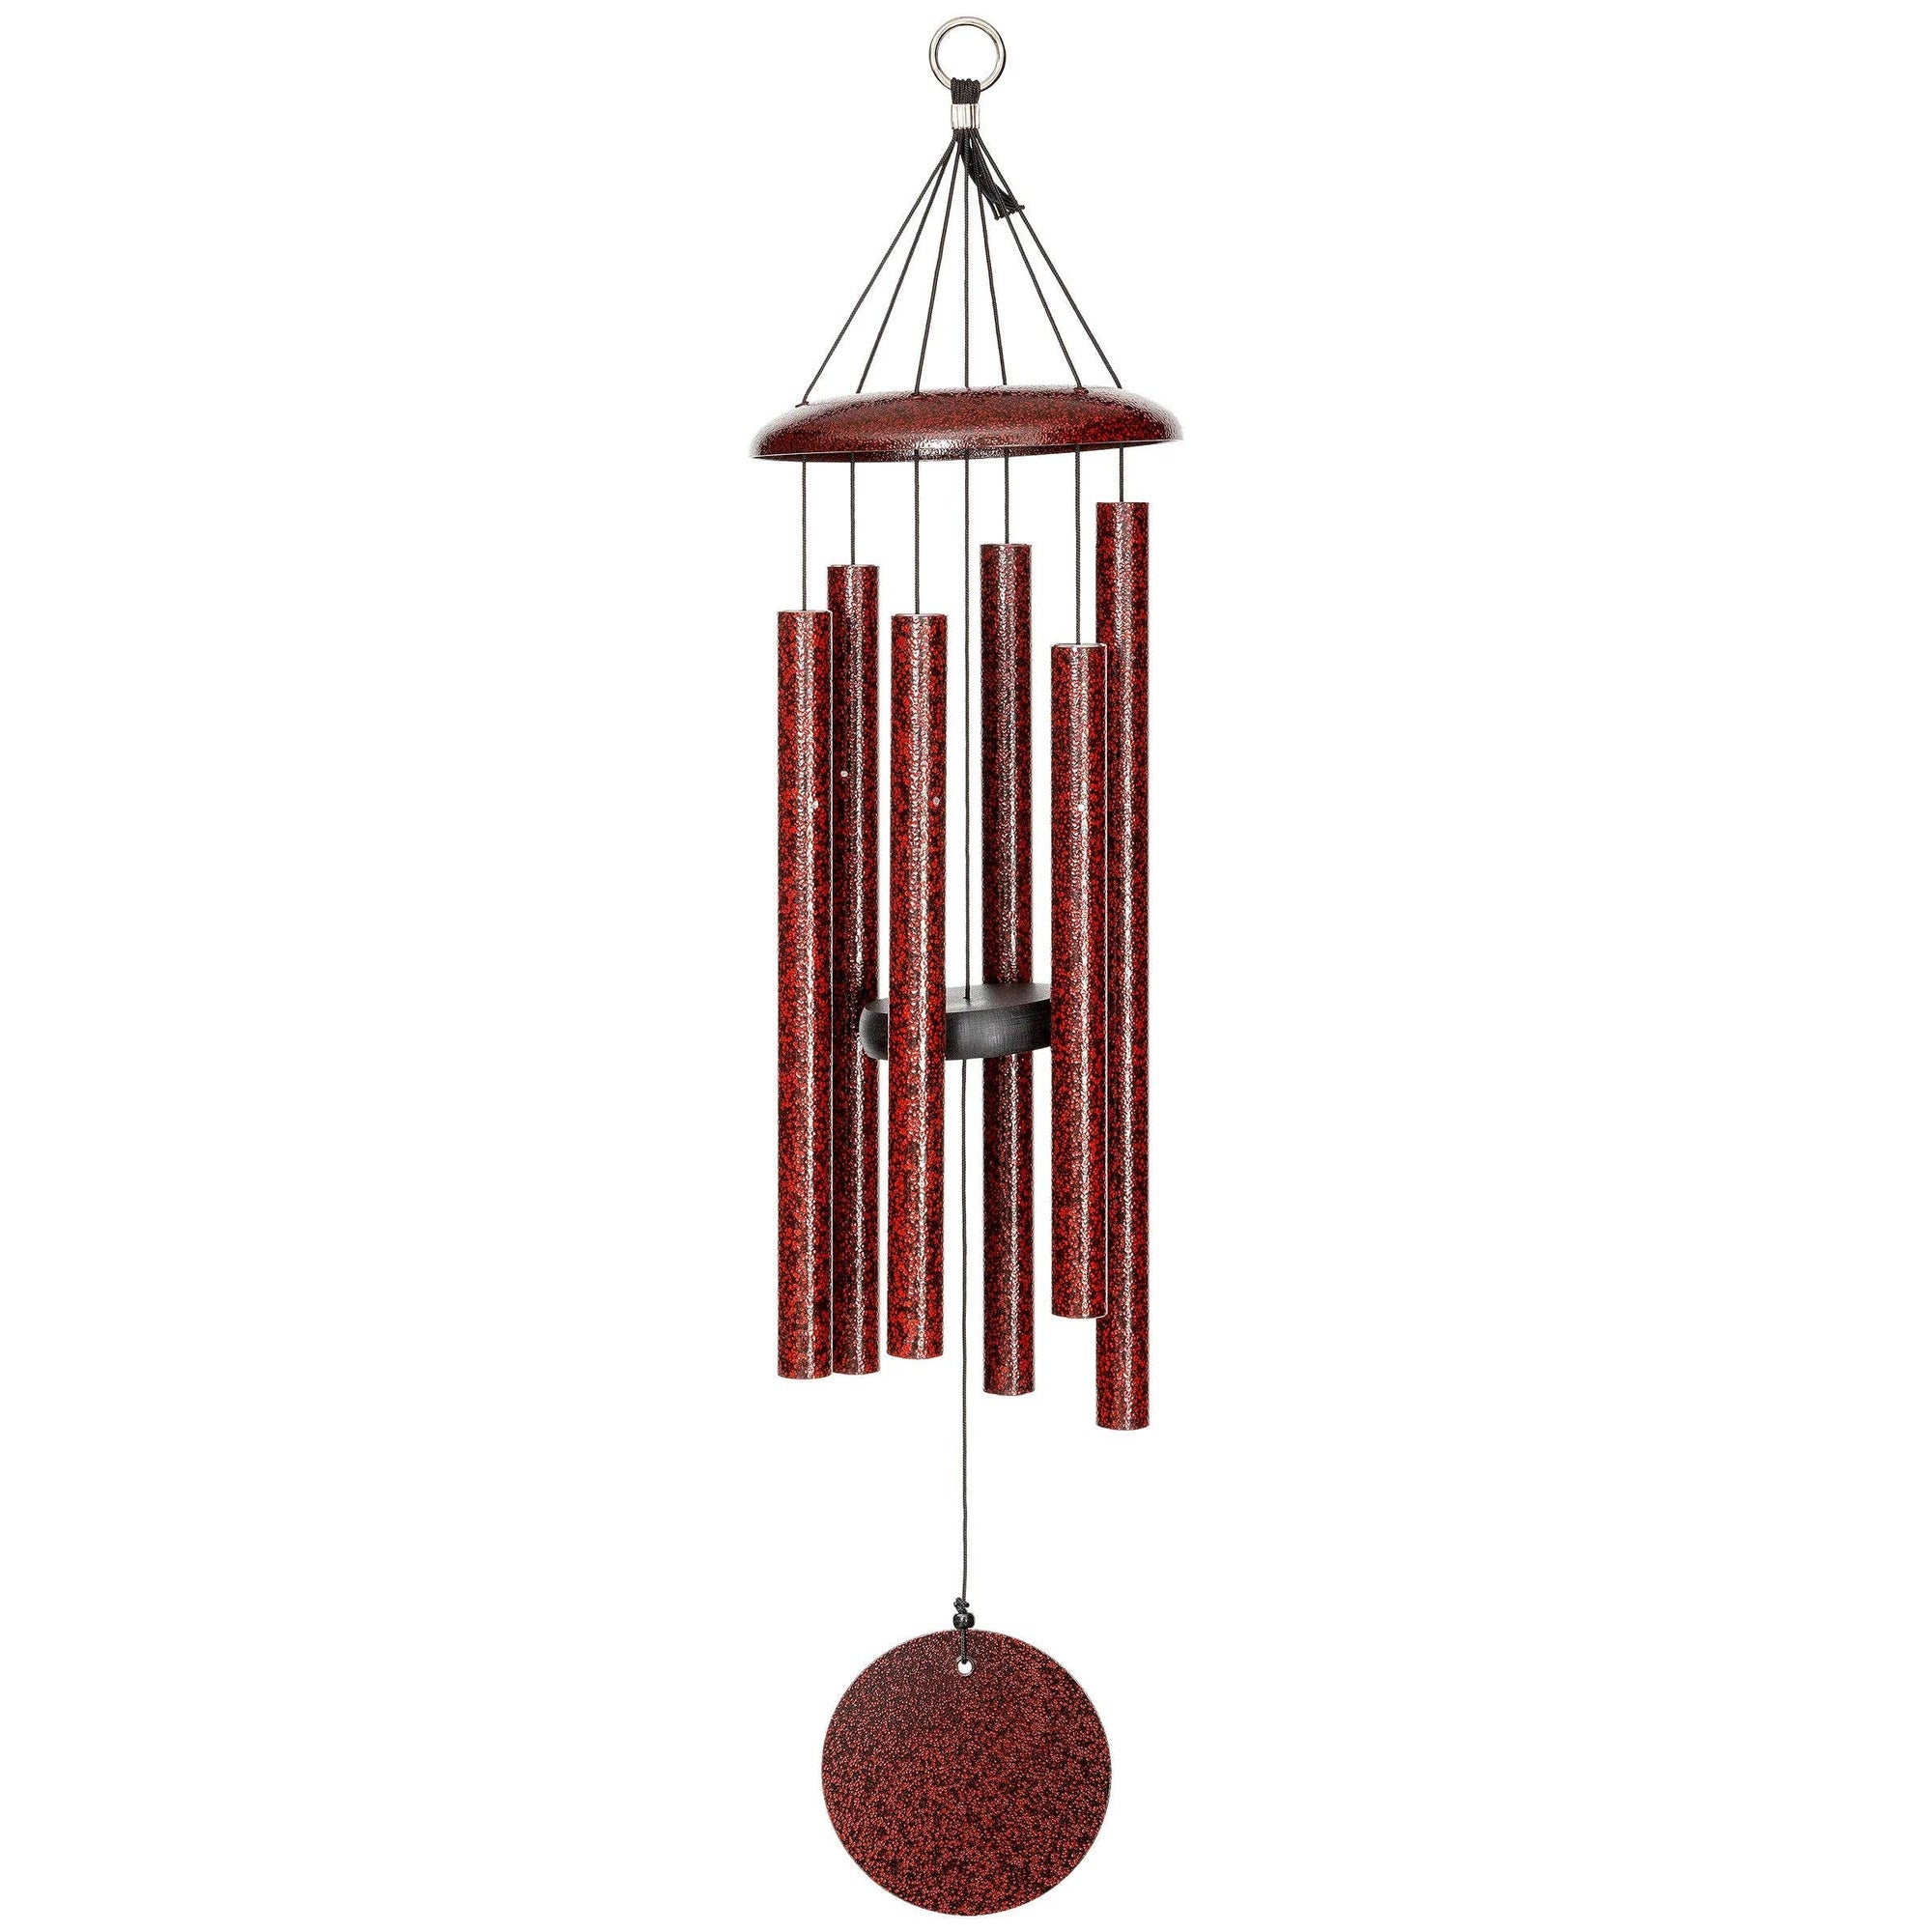 A small red Corinthian Bells® 30-inch Windchime hanging on a white background.